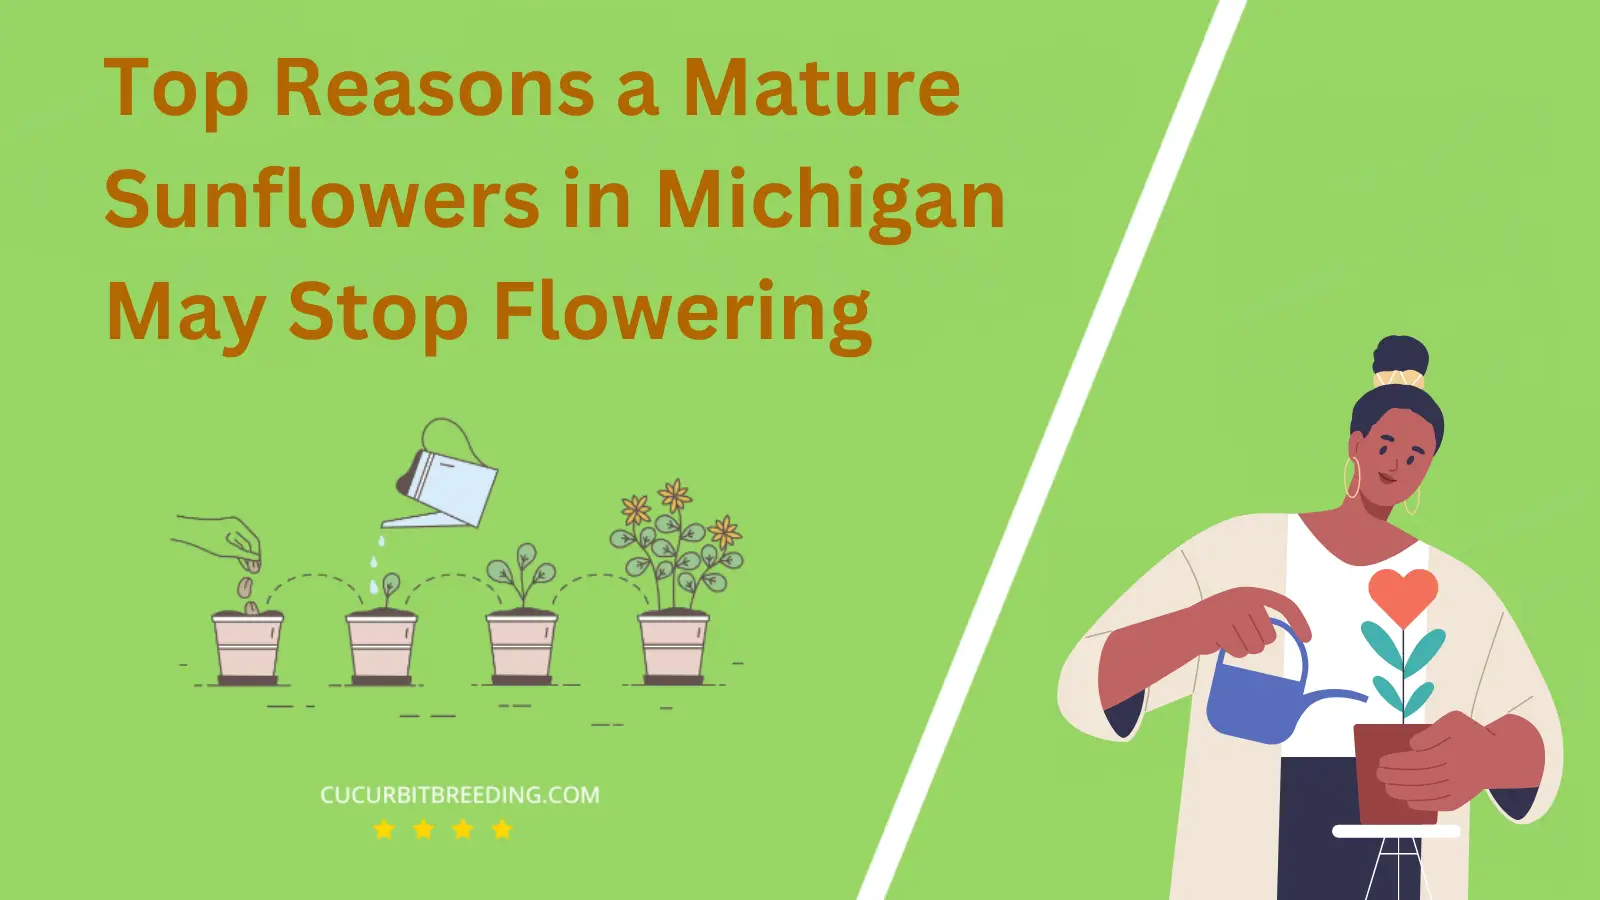 Top Reasons a Mature Sunflowers in Michigan May Stop Flowering